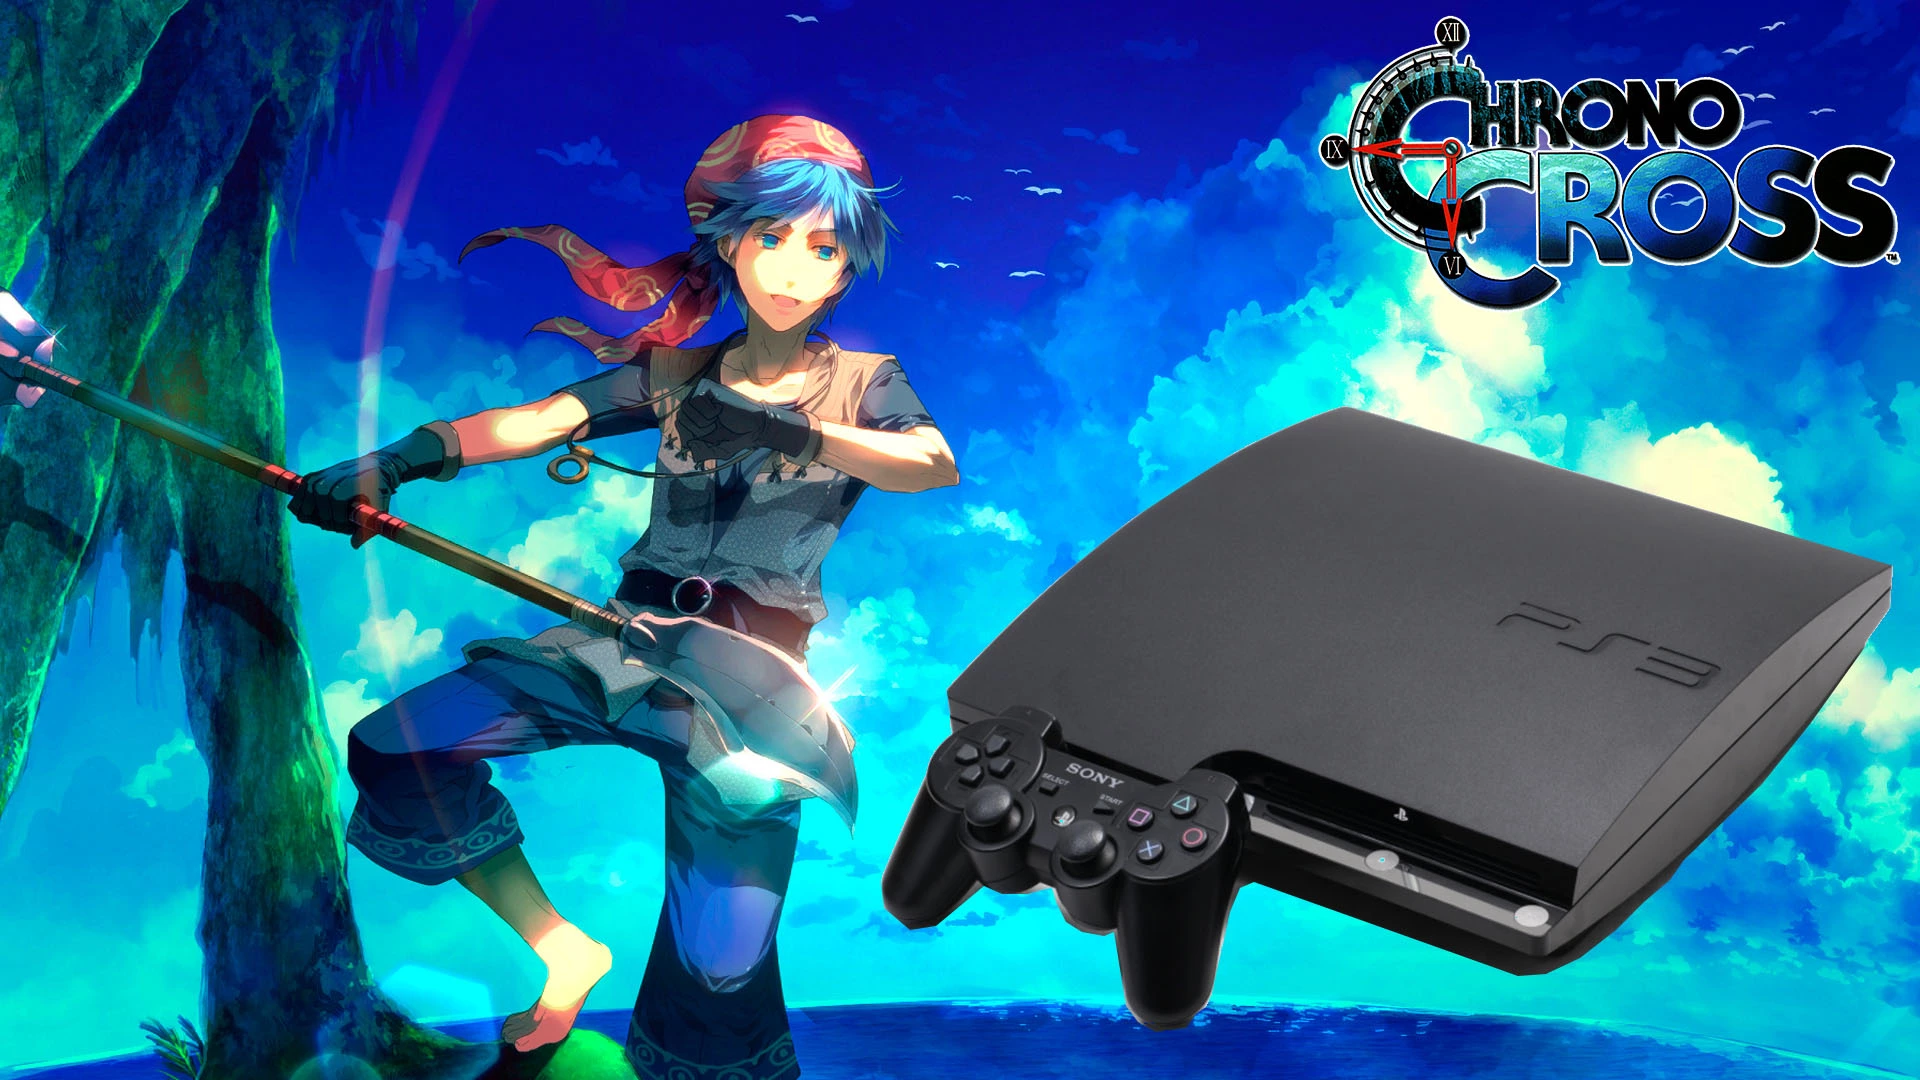 Chrono cross and other classic games of PS3 and PS Vita are unplayable